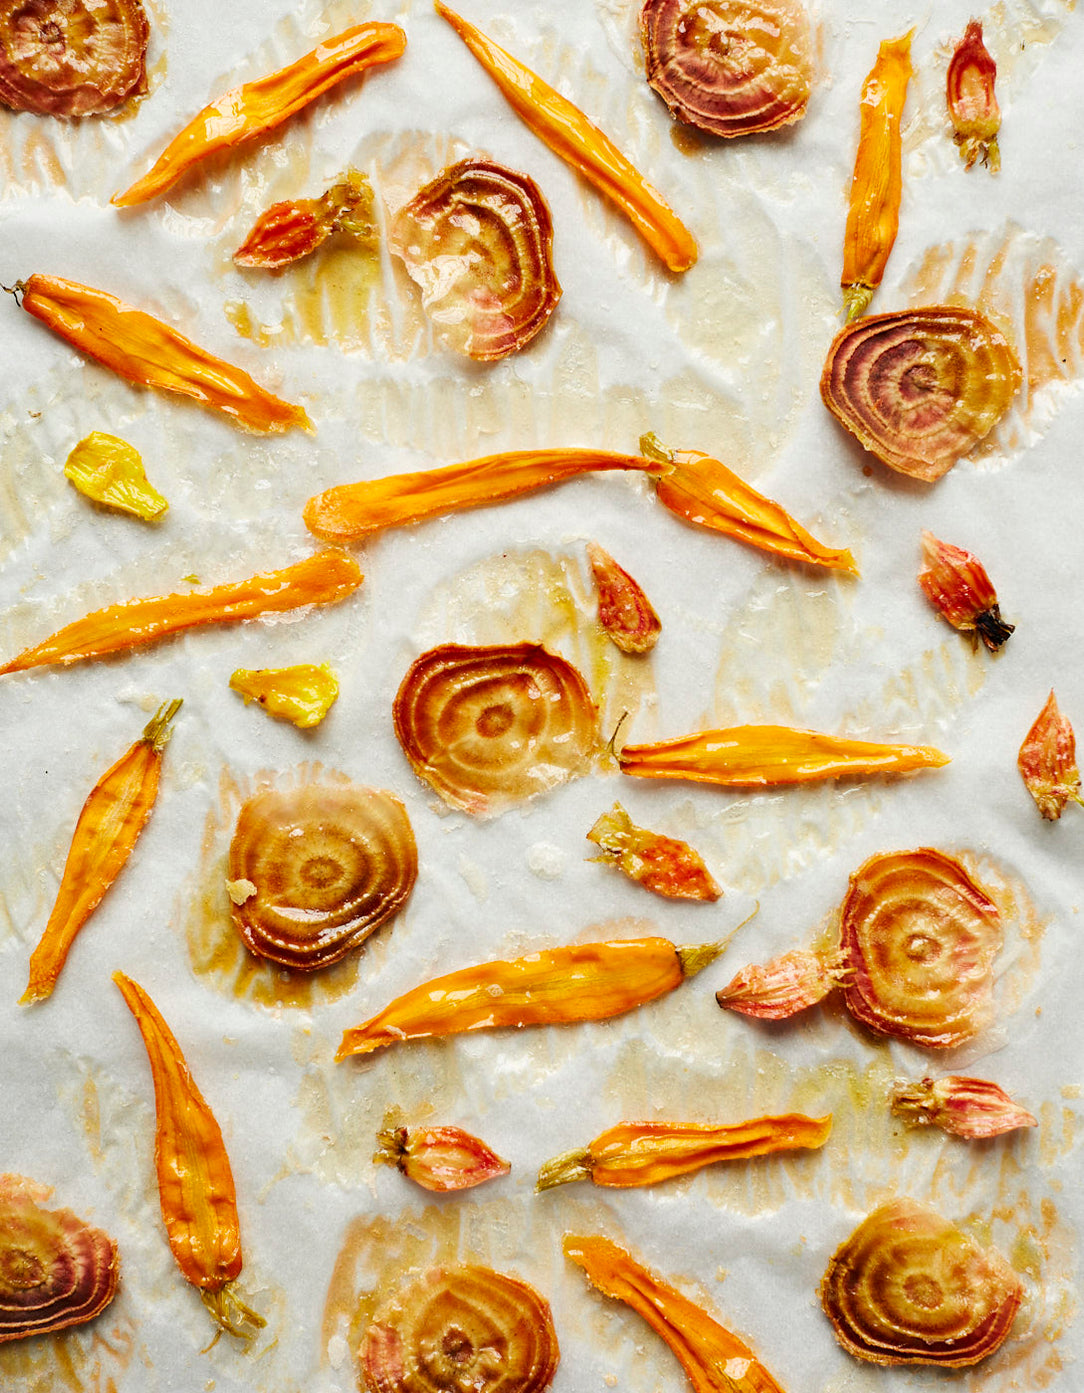 Candied root vegetables.